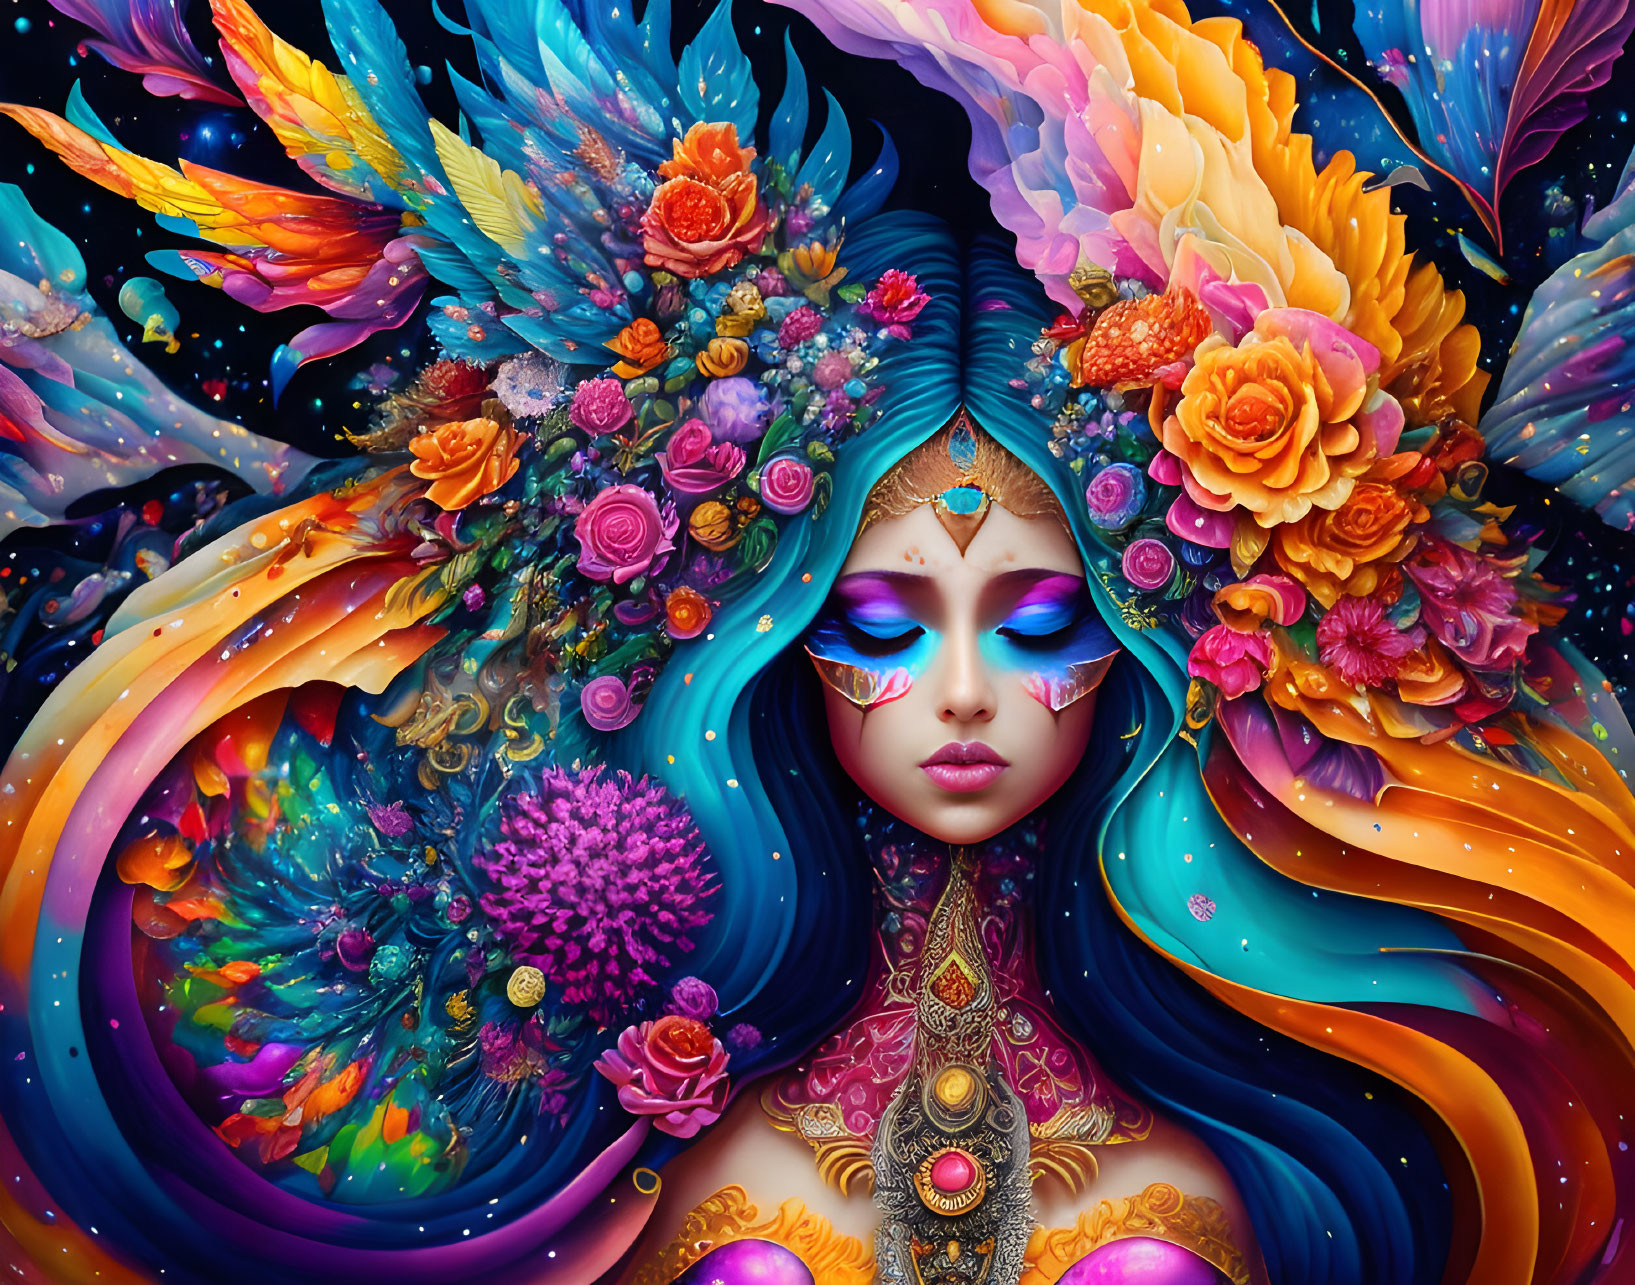 Colorful Portrait: Woman with Elaborate Wings and Floral Hair